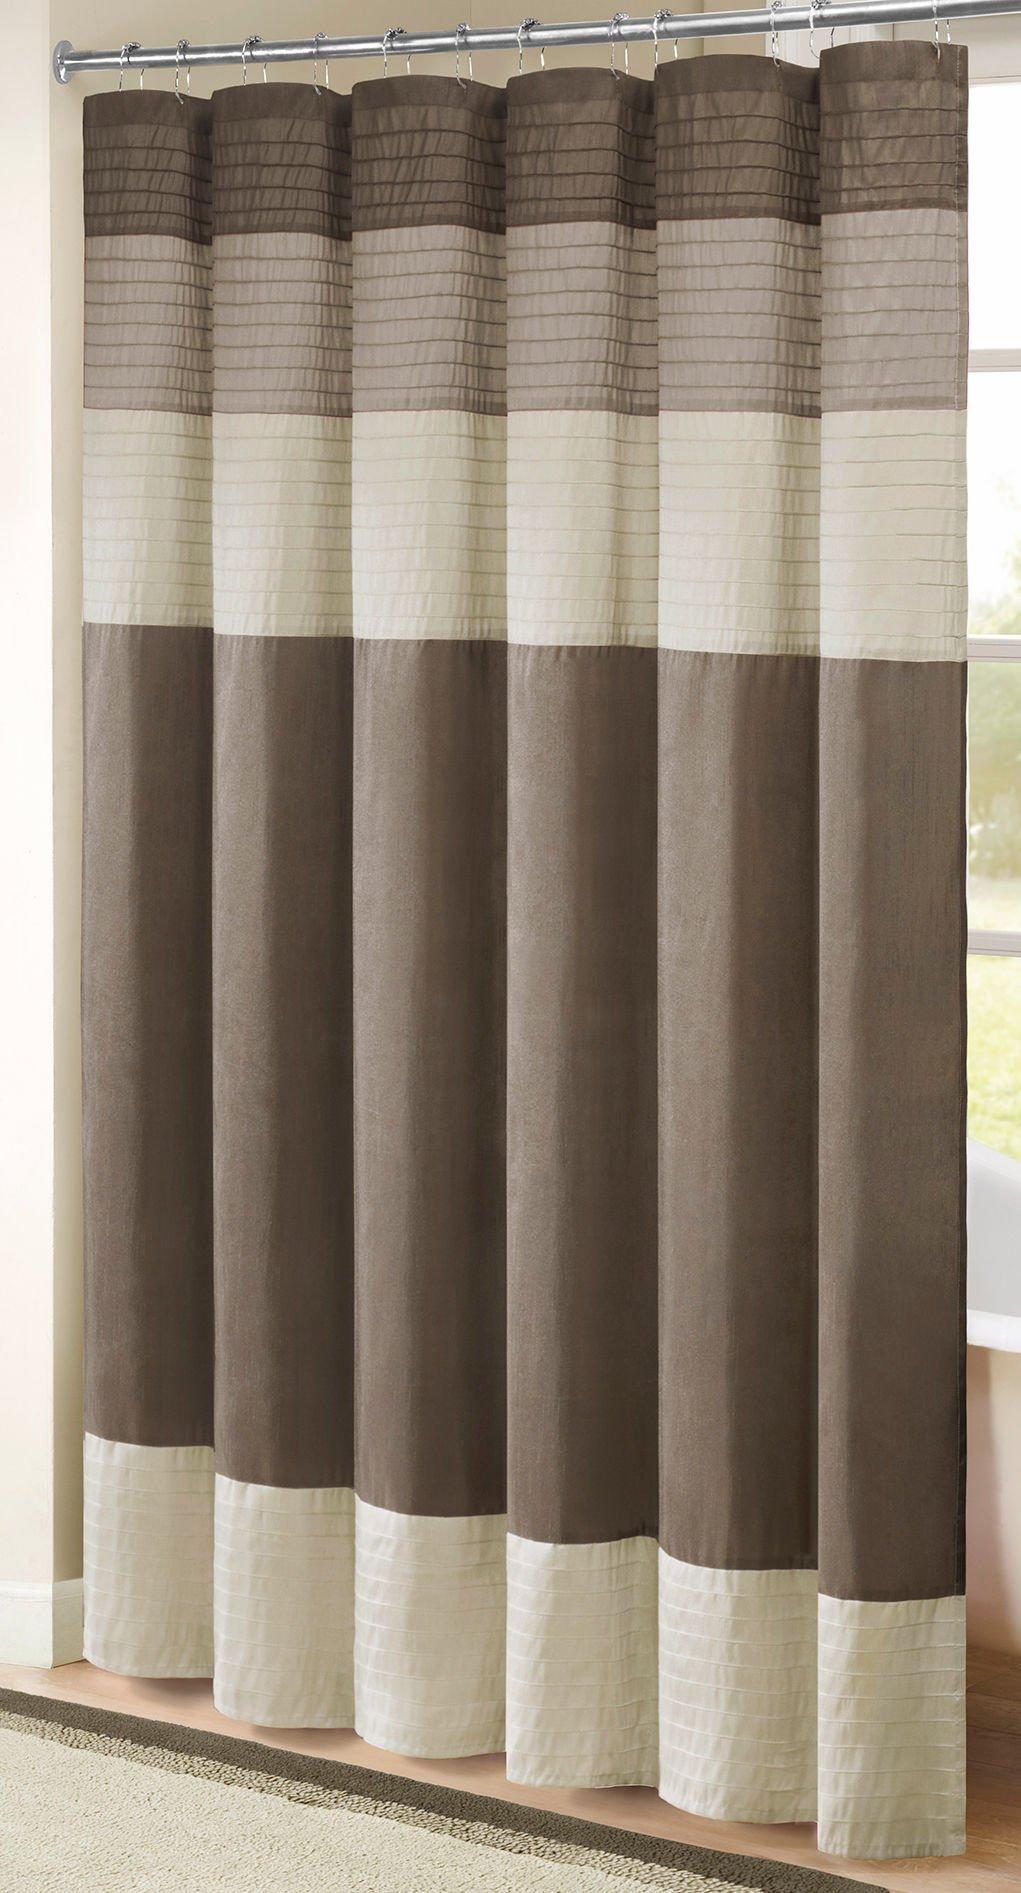 Amherst Natural Shower Curtain